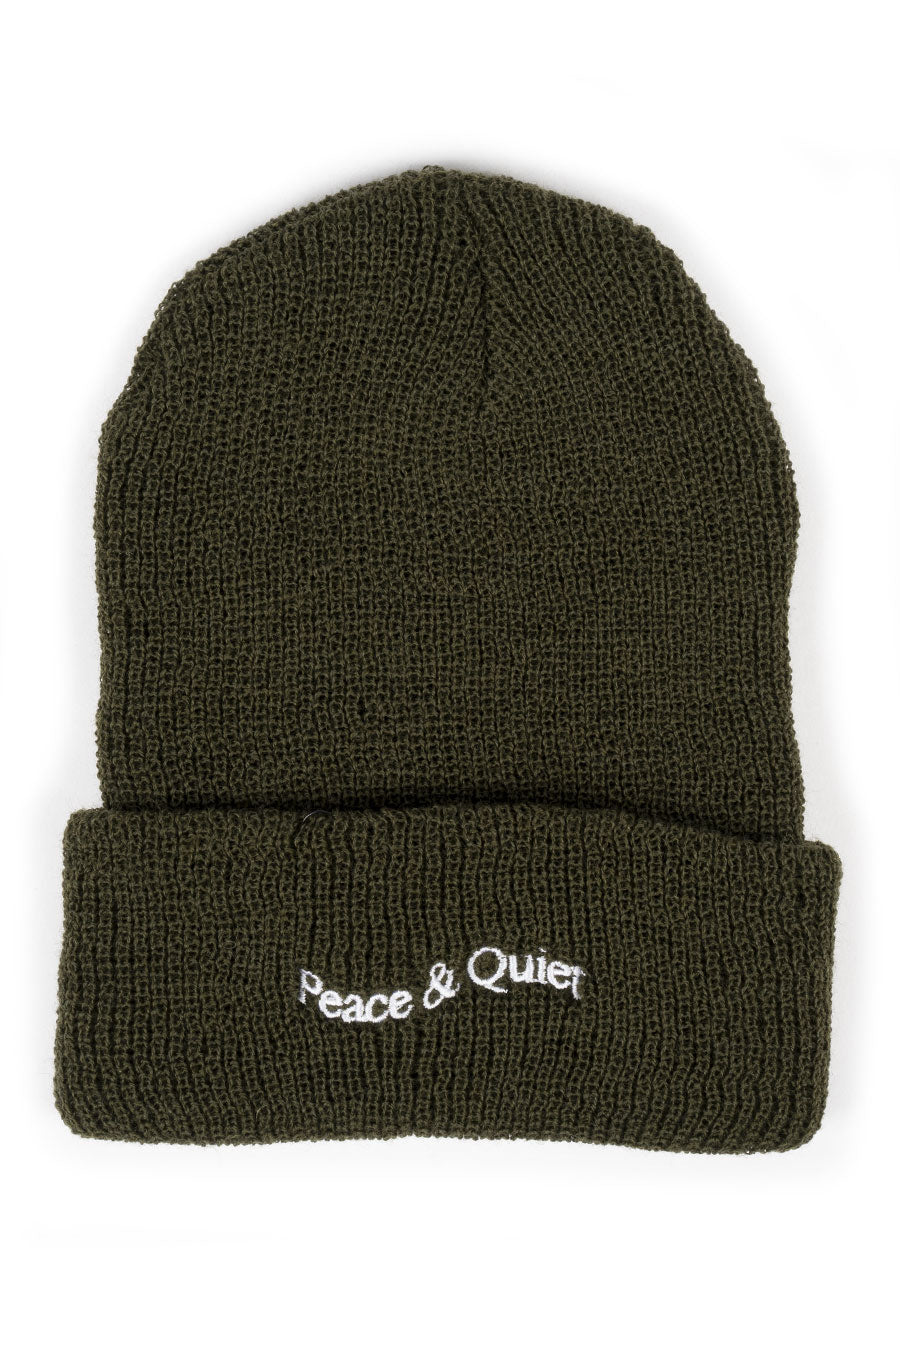 THE MUSEUM OF PEACE AND QUIET WORDMARK BEANIE OLIVE